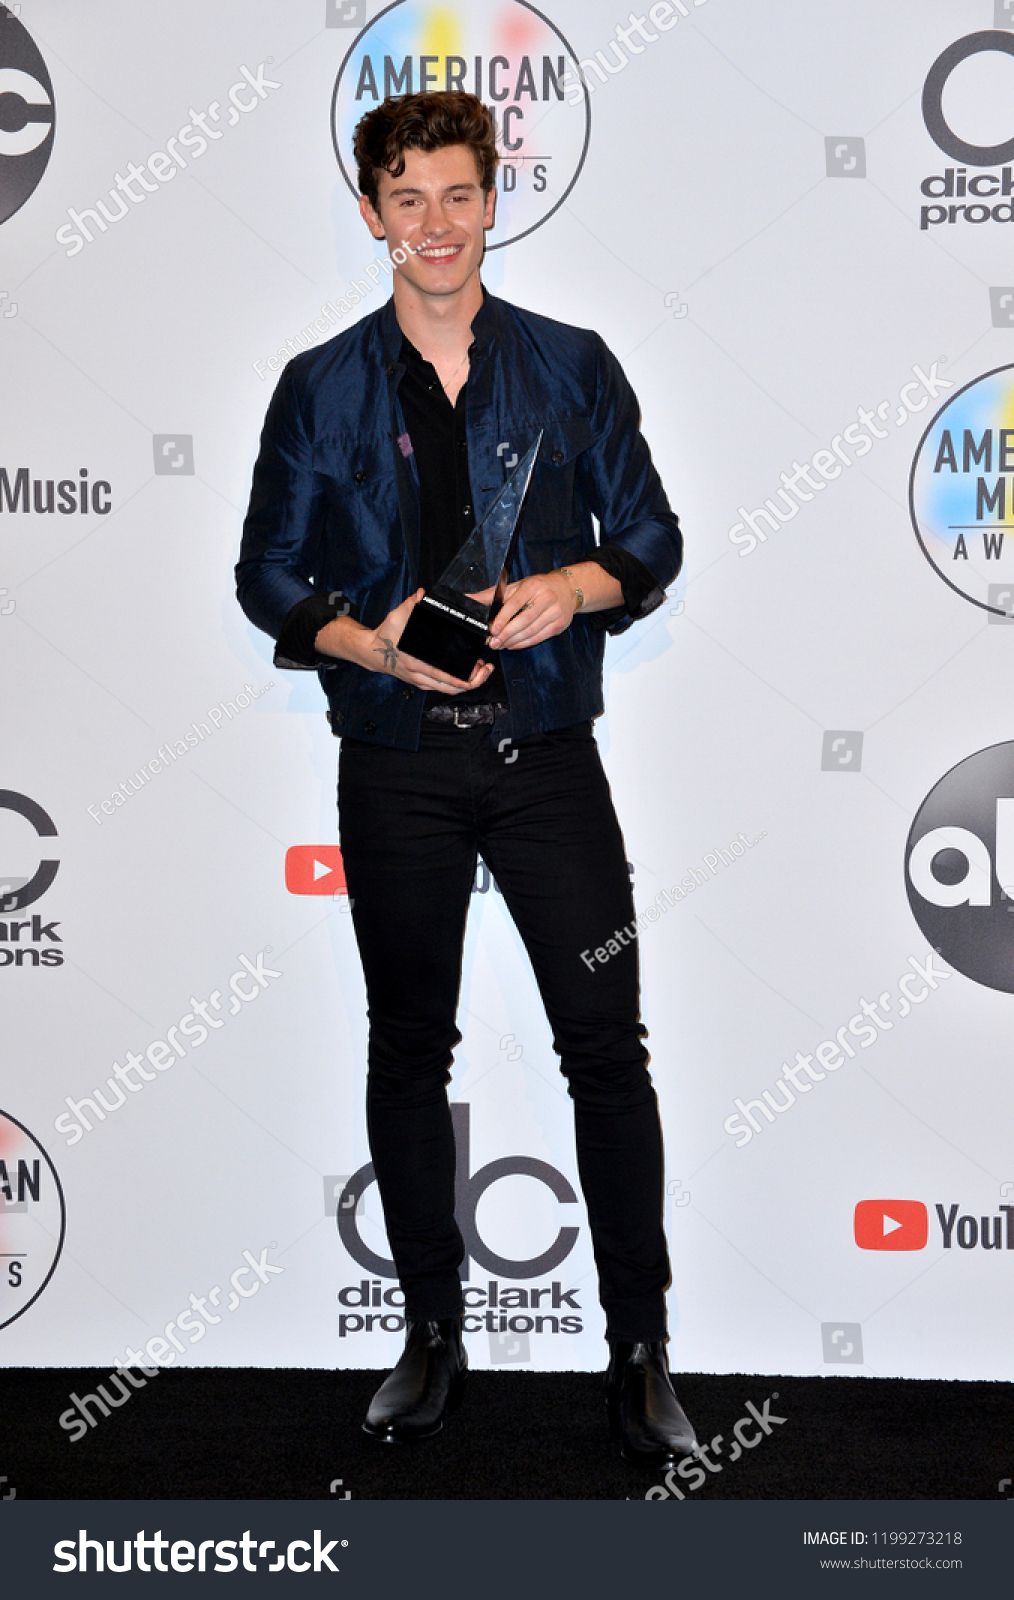 LOS ANGELES, CA. October 09, 2018: Shawn Mendes at the 2018 American Music Awards at the Microsoft Theatre LA Live.
 #1199273218